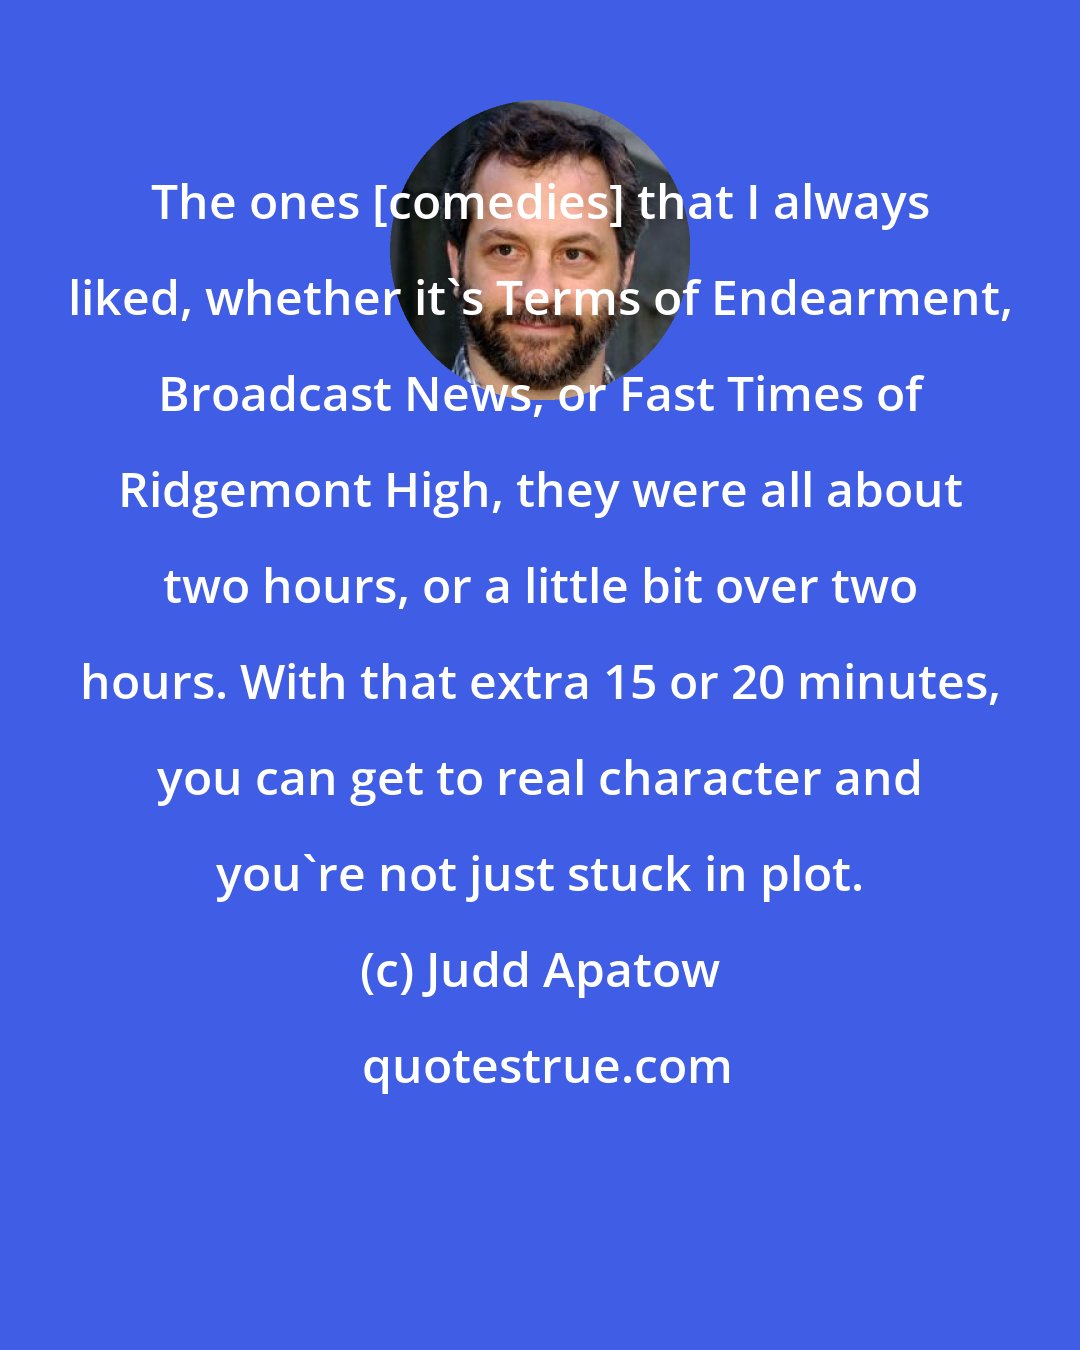 Judd Apatow: The ones [comedies] that I always liked, whether it's Terms of Endearment, Broadcast News, or Fast Times of Ridgemont High, they were all about two hours, or a little bit over two hours. With that extra 15 or 20 minutes, you can get to real character and you're not just stuck in plot.